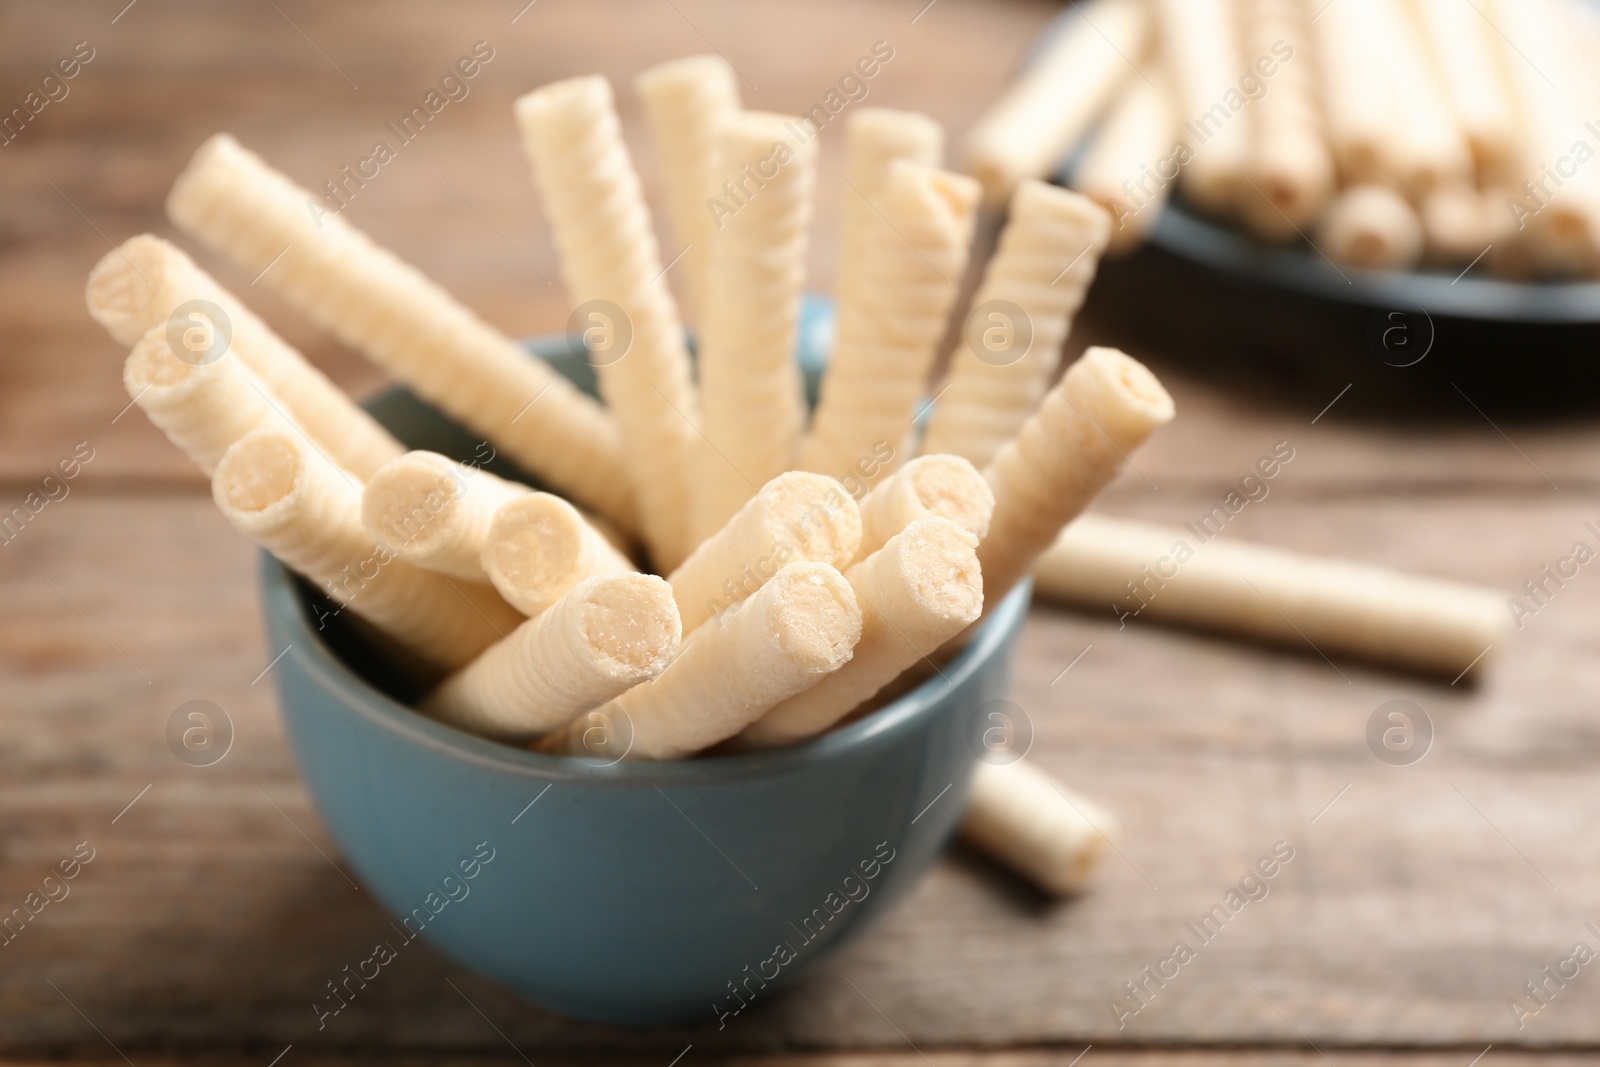 Photo of Bowl with delicious wafer rolls on wooden table, closeup. Sweet food